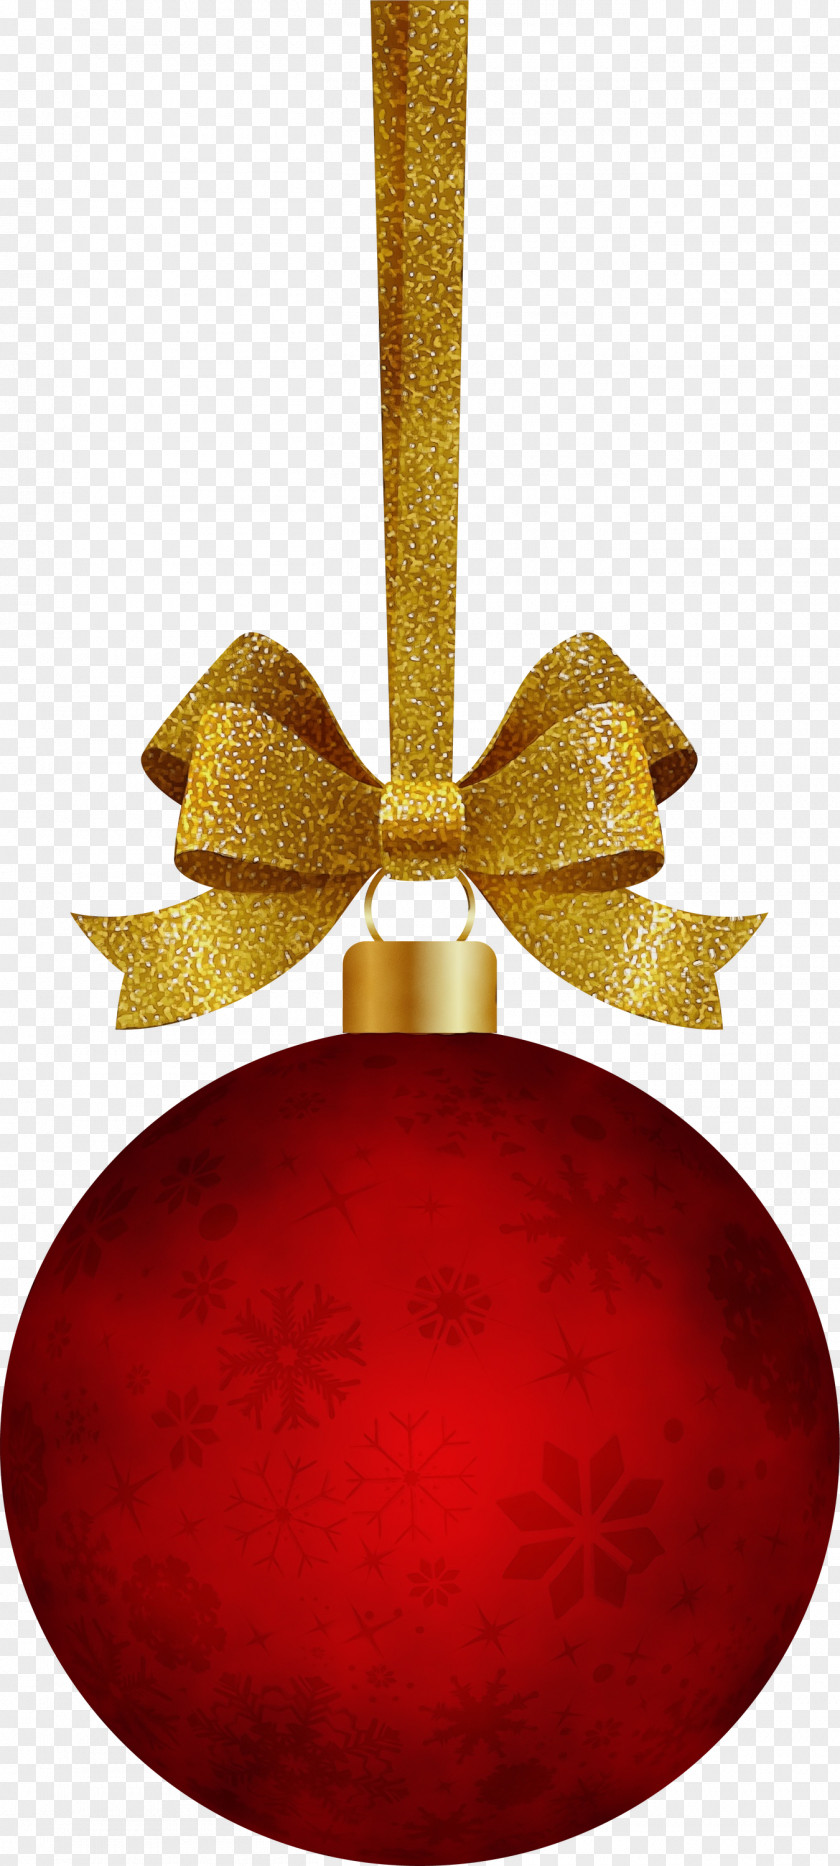 Christmas Bell Ornament PNG